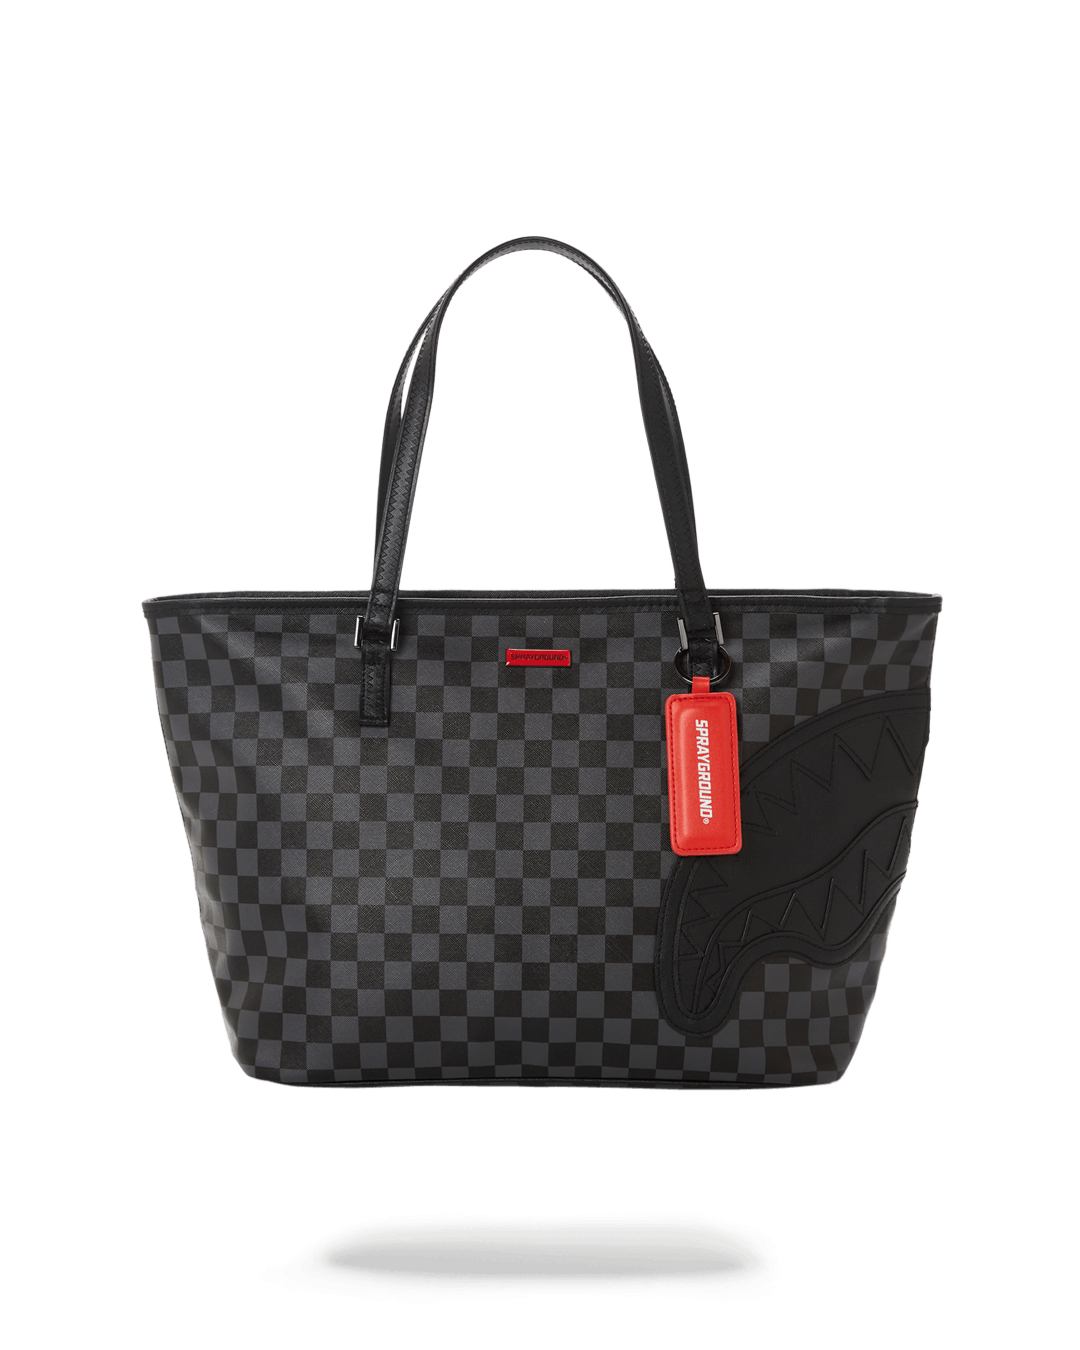 HENNY BLACK TOTE - HIGH QUALITY AND INEXPENSIVE - HENNY BLACK TOTE HIGH QUALITY AND INEXPENSIVE-01-0